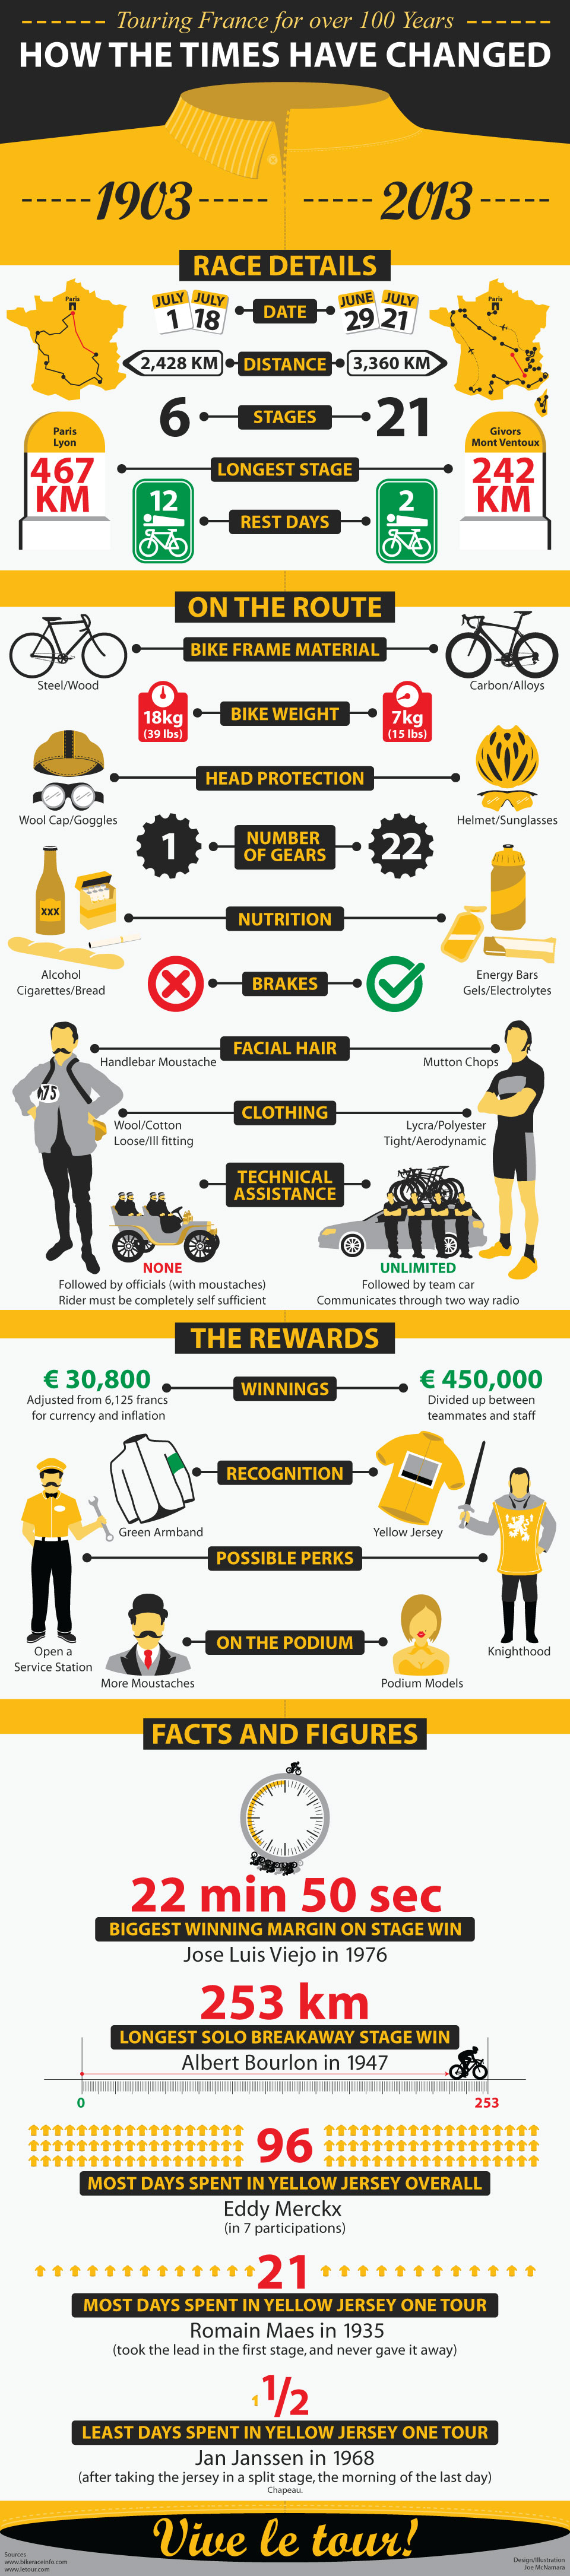 Fun info graphic by Joe McNamara showing some comparisons over the years of the TDF